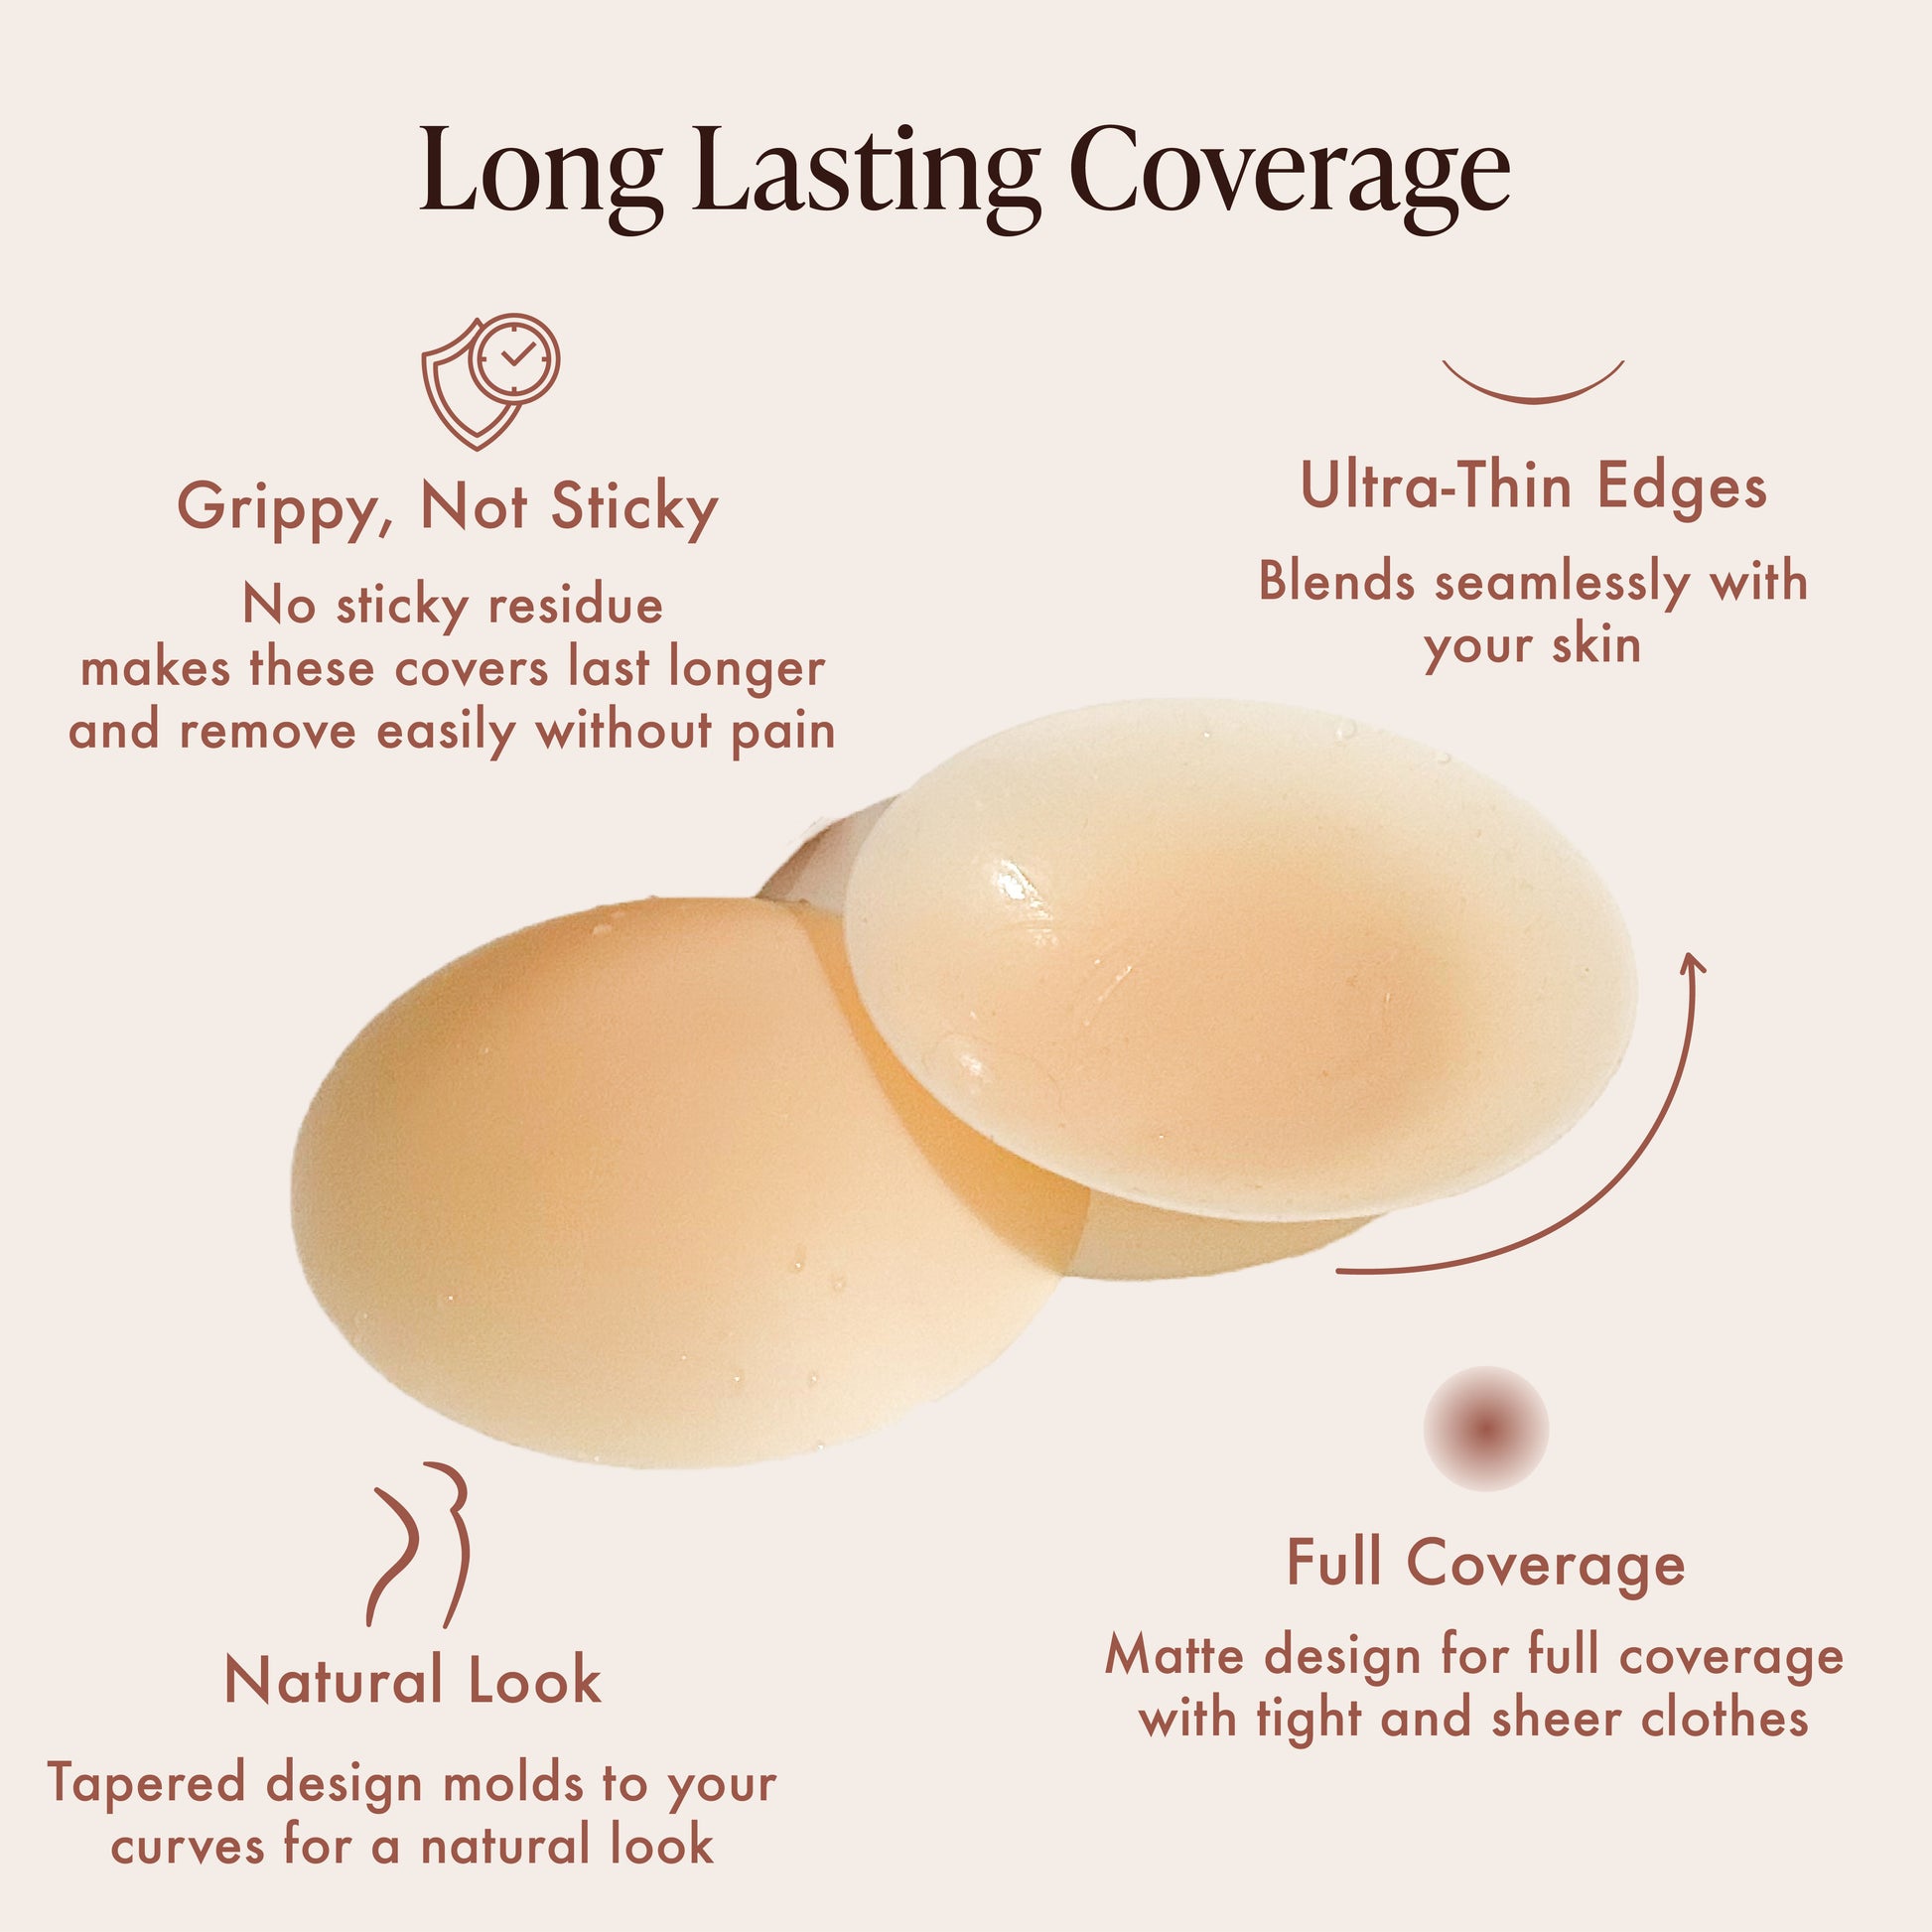 Non-Adhesive Nipple Cover with Feature Call-outs: Grippy, Not Sticky, Ultra-Thin Edges, Natural Look, Full Coverage